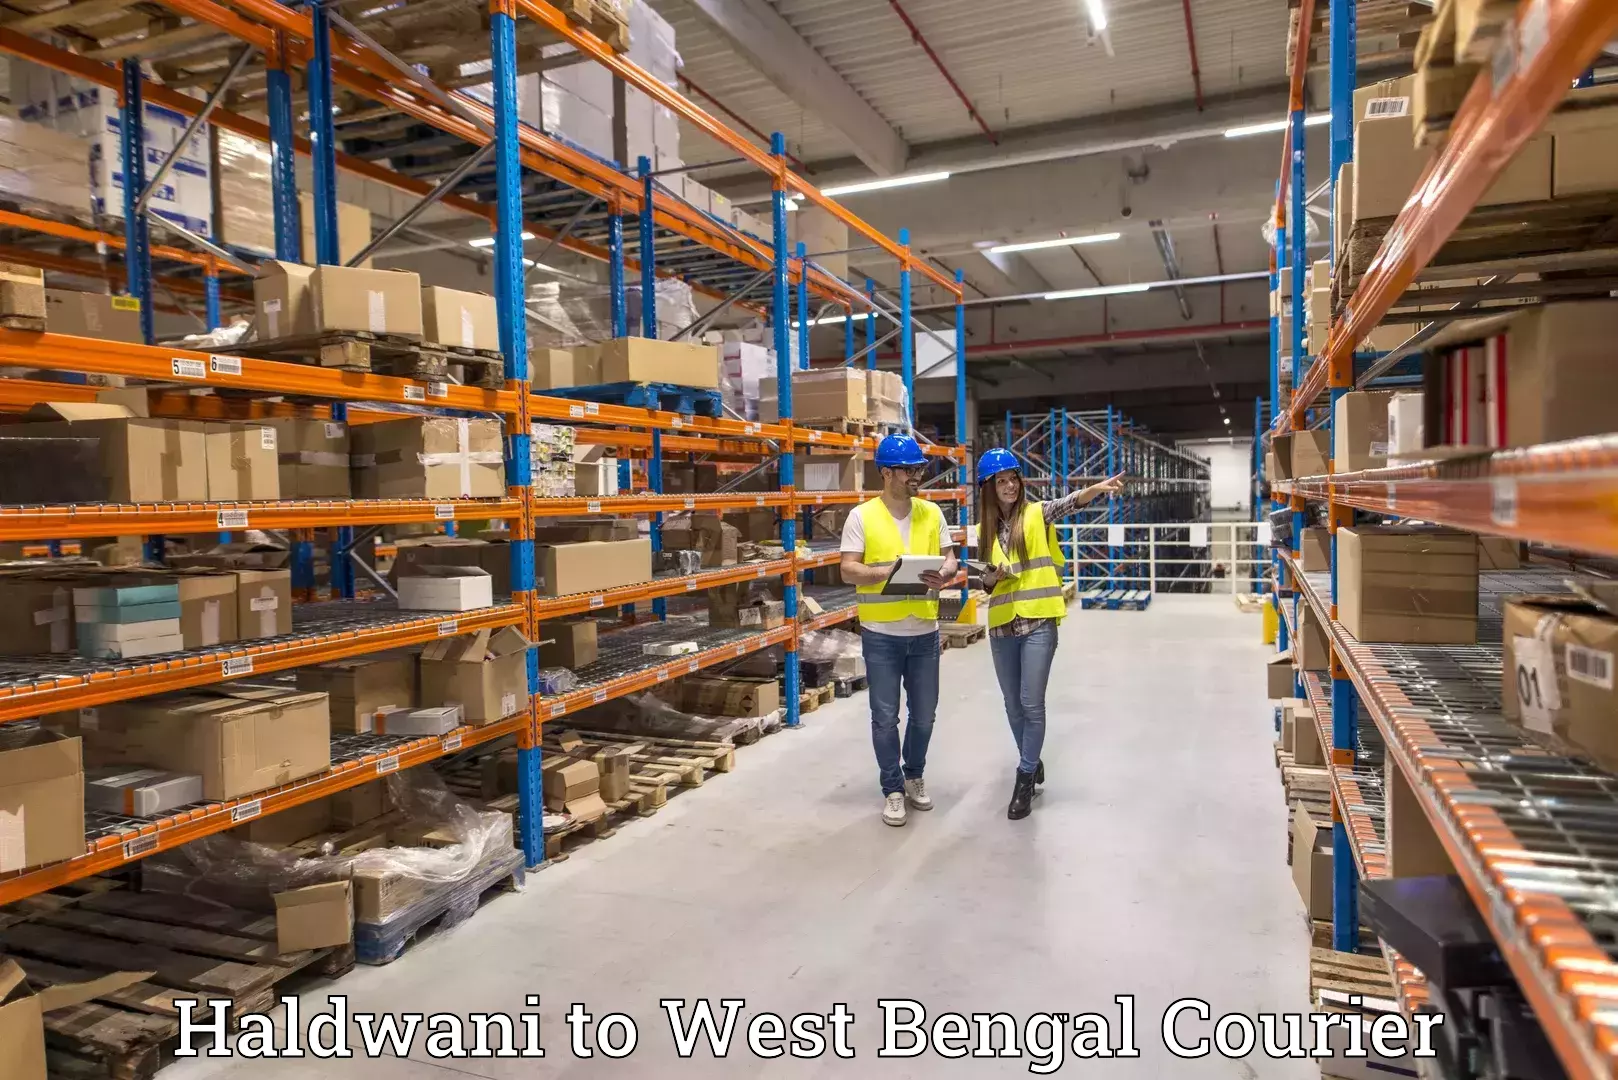 Courier service innovation Haldwani to West Bengal